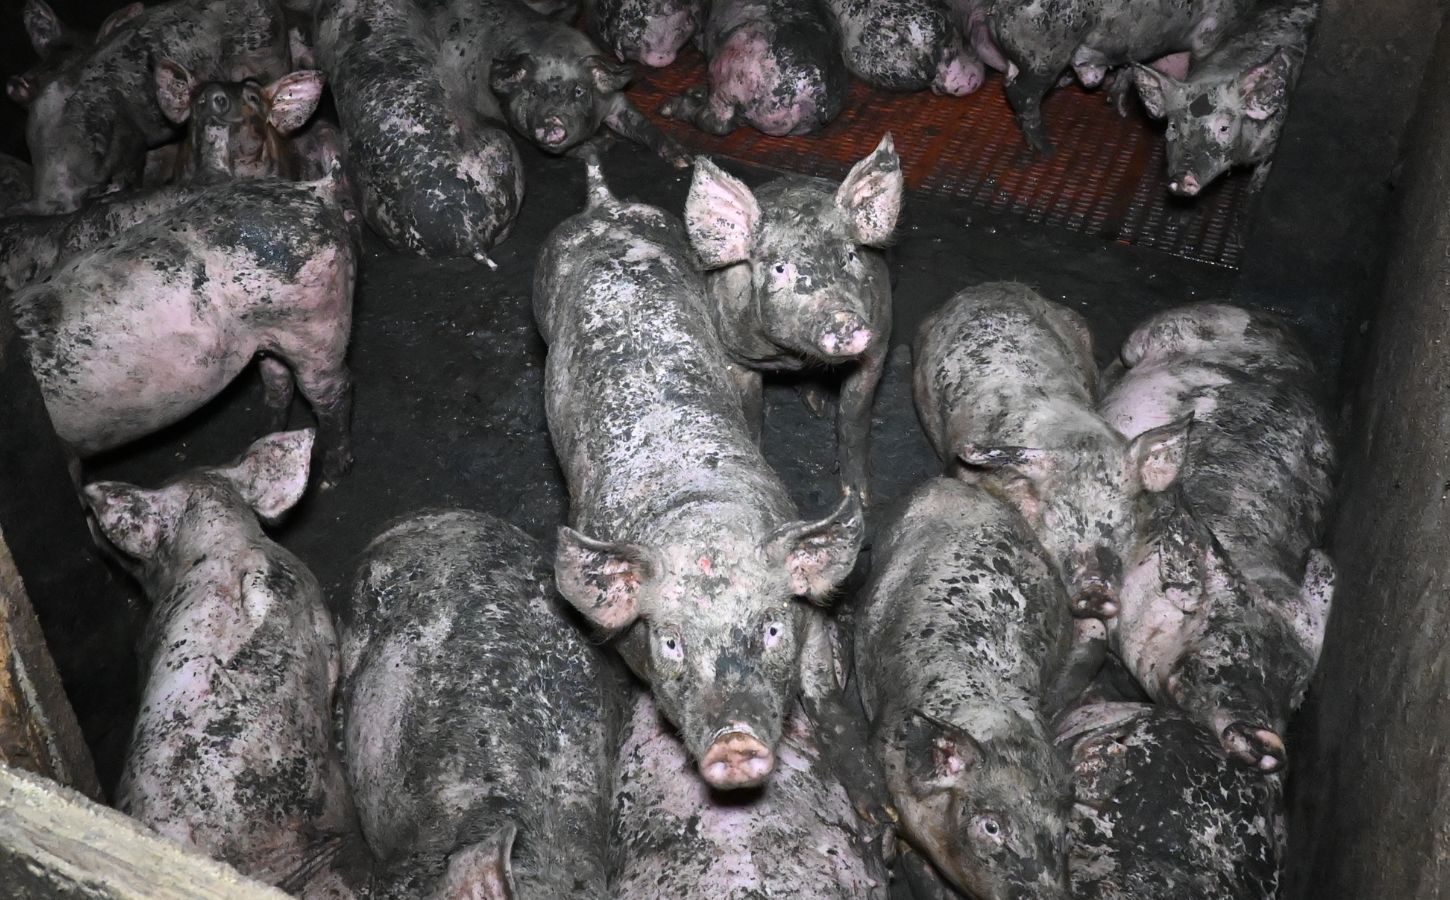 Pigs covered in dirt in a factory farm